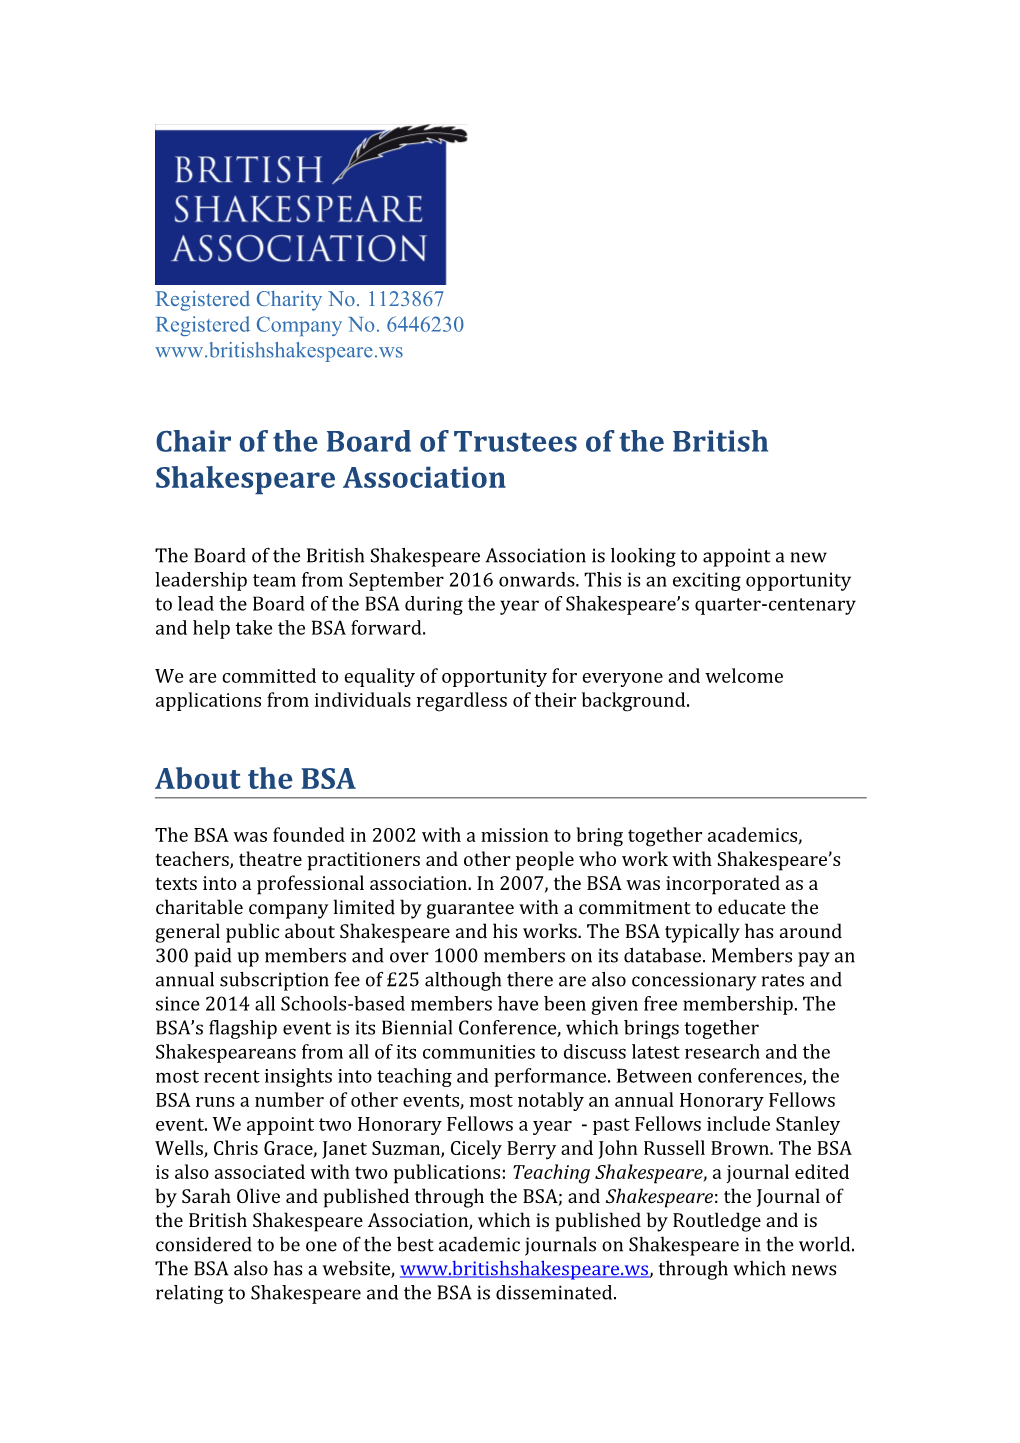 Chair of the Board of Trustees of the British Shakespeare Association